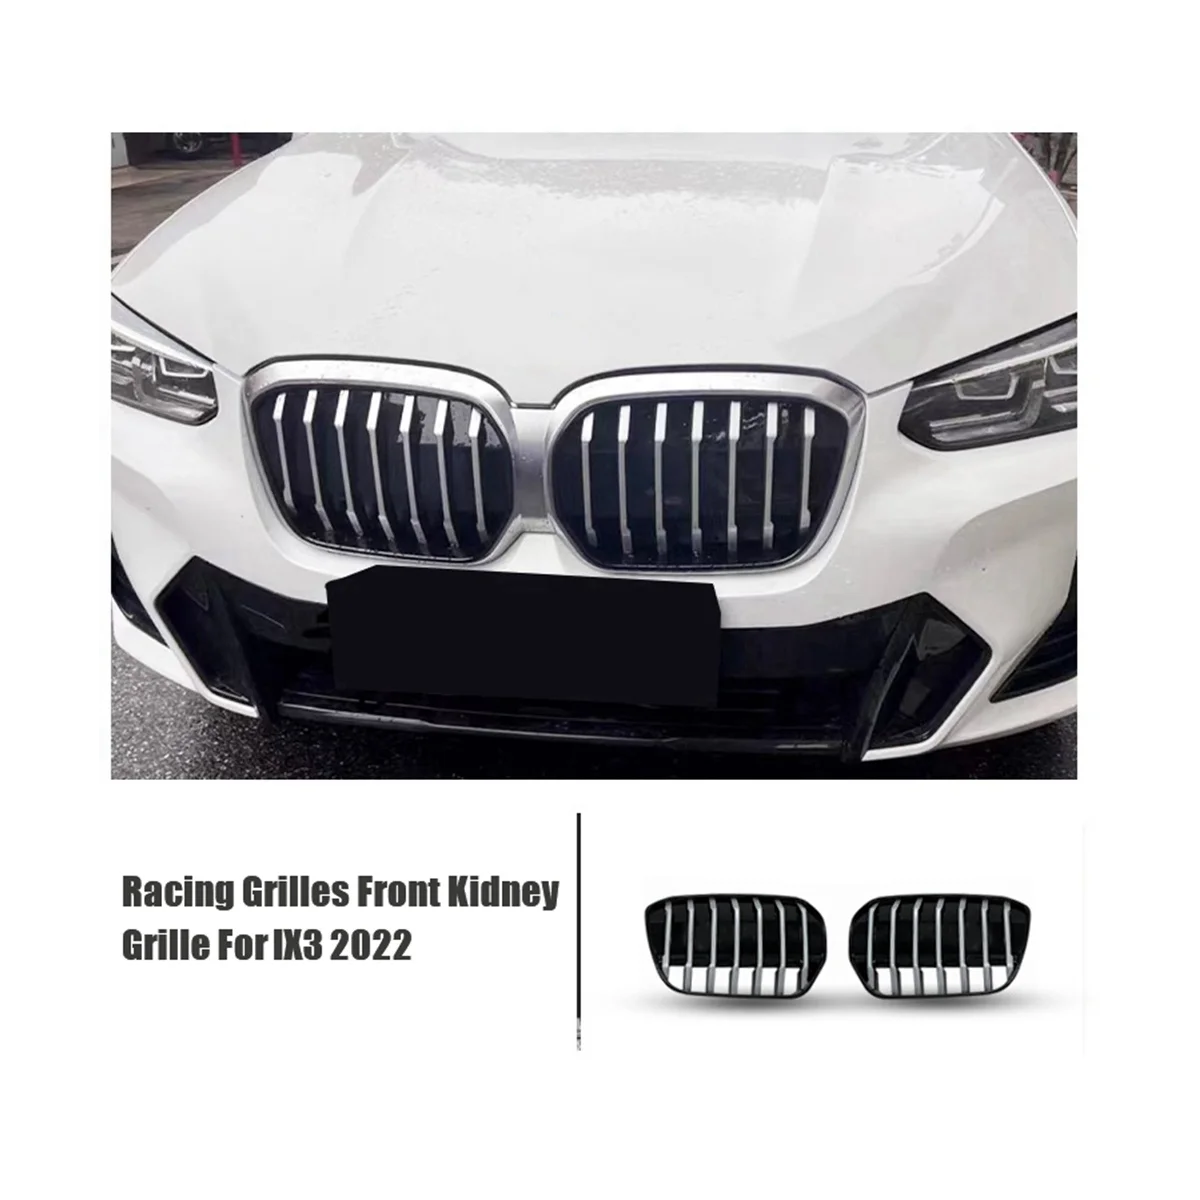 

2Pcs Car Racing Grilles Front Kidney Grille for BMW IX3 2022 Car Bumper Hood Mesh Air Vent Radiator Cover Grid Body Kit